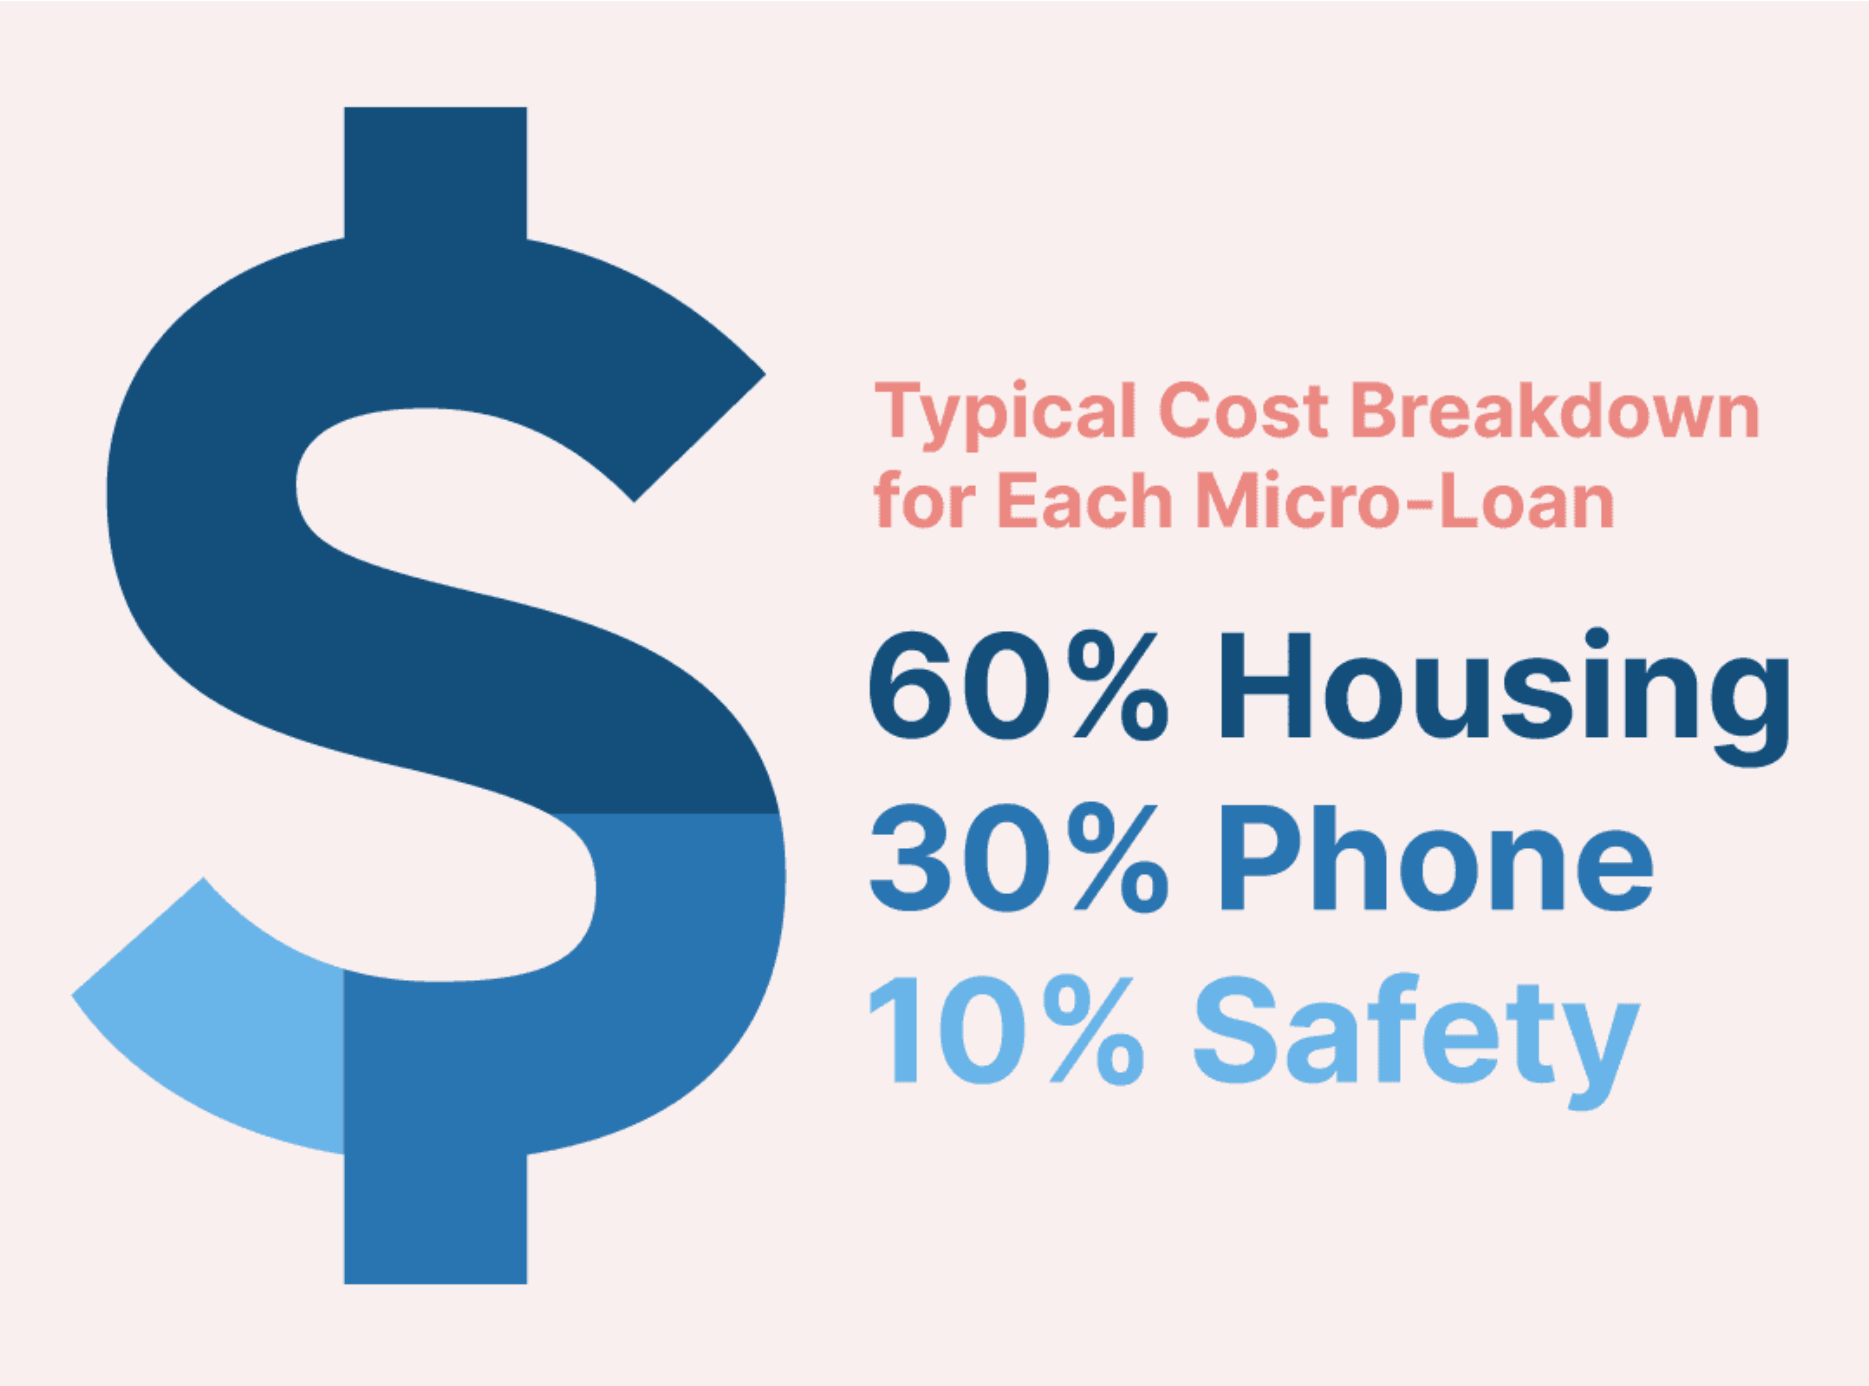 Typical cost breakdown for each micro-loan: 60% housing, 30% phone, 10% safety